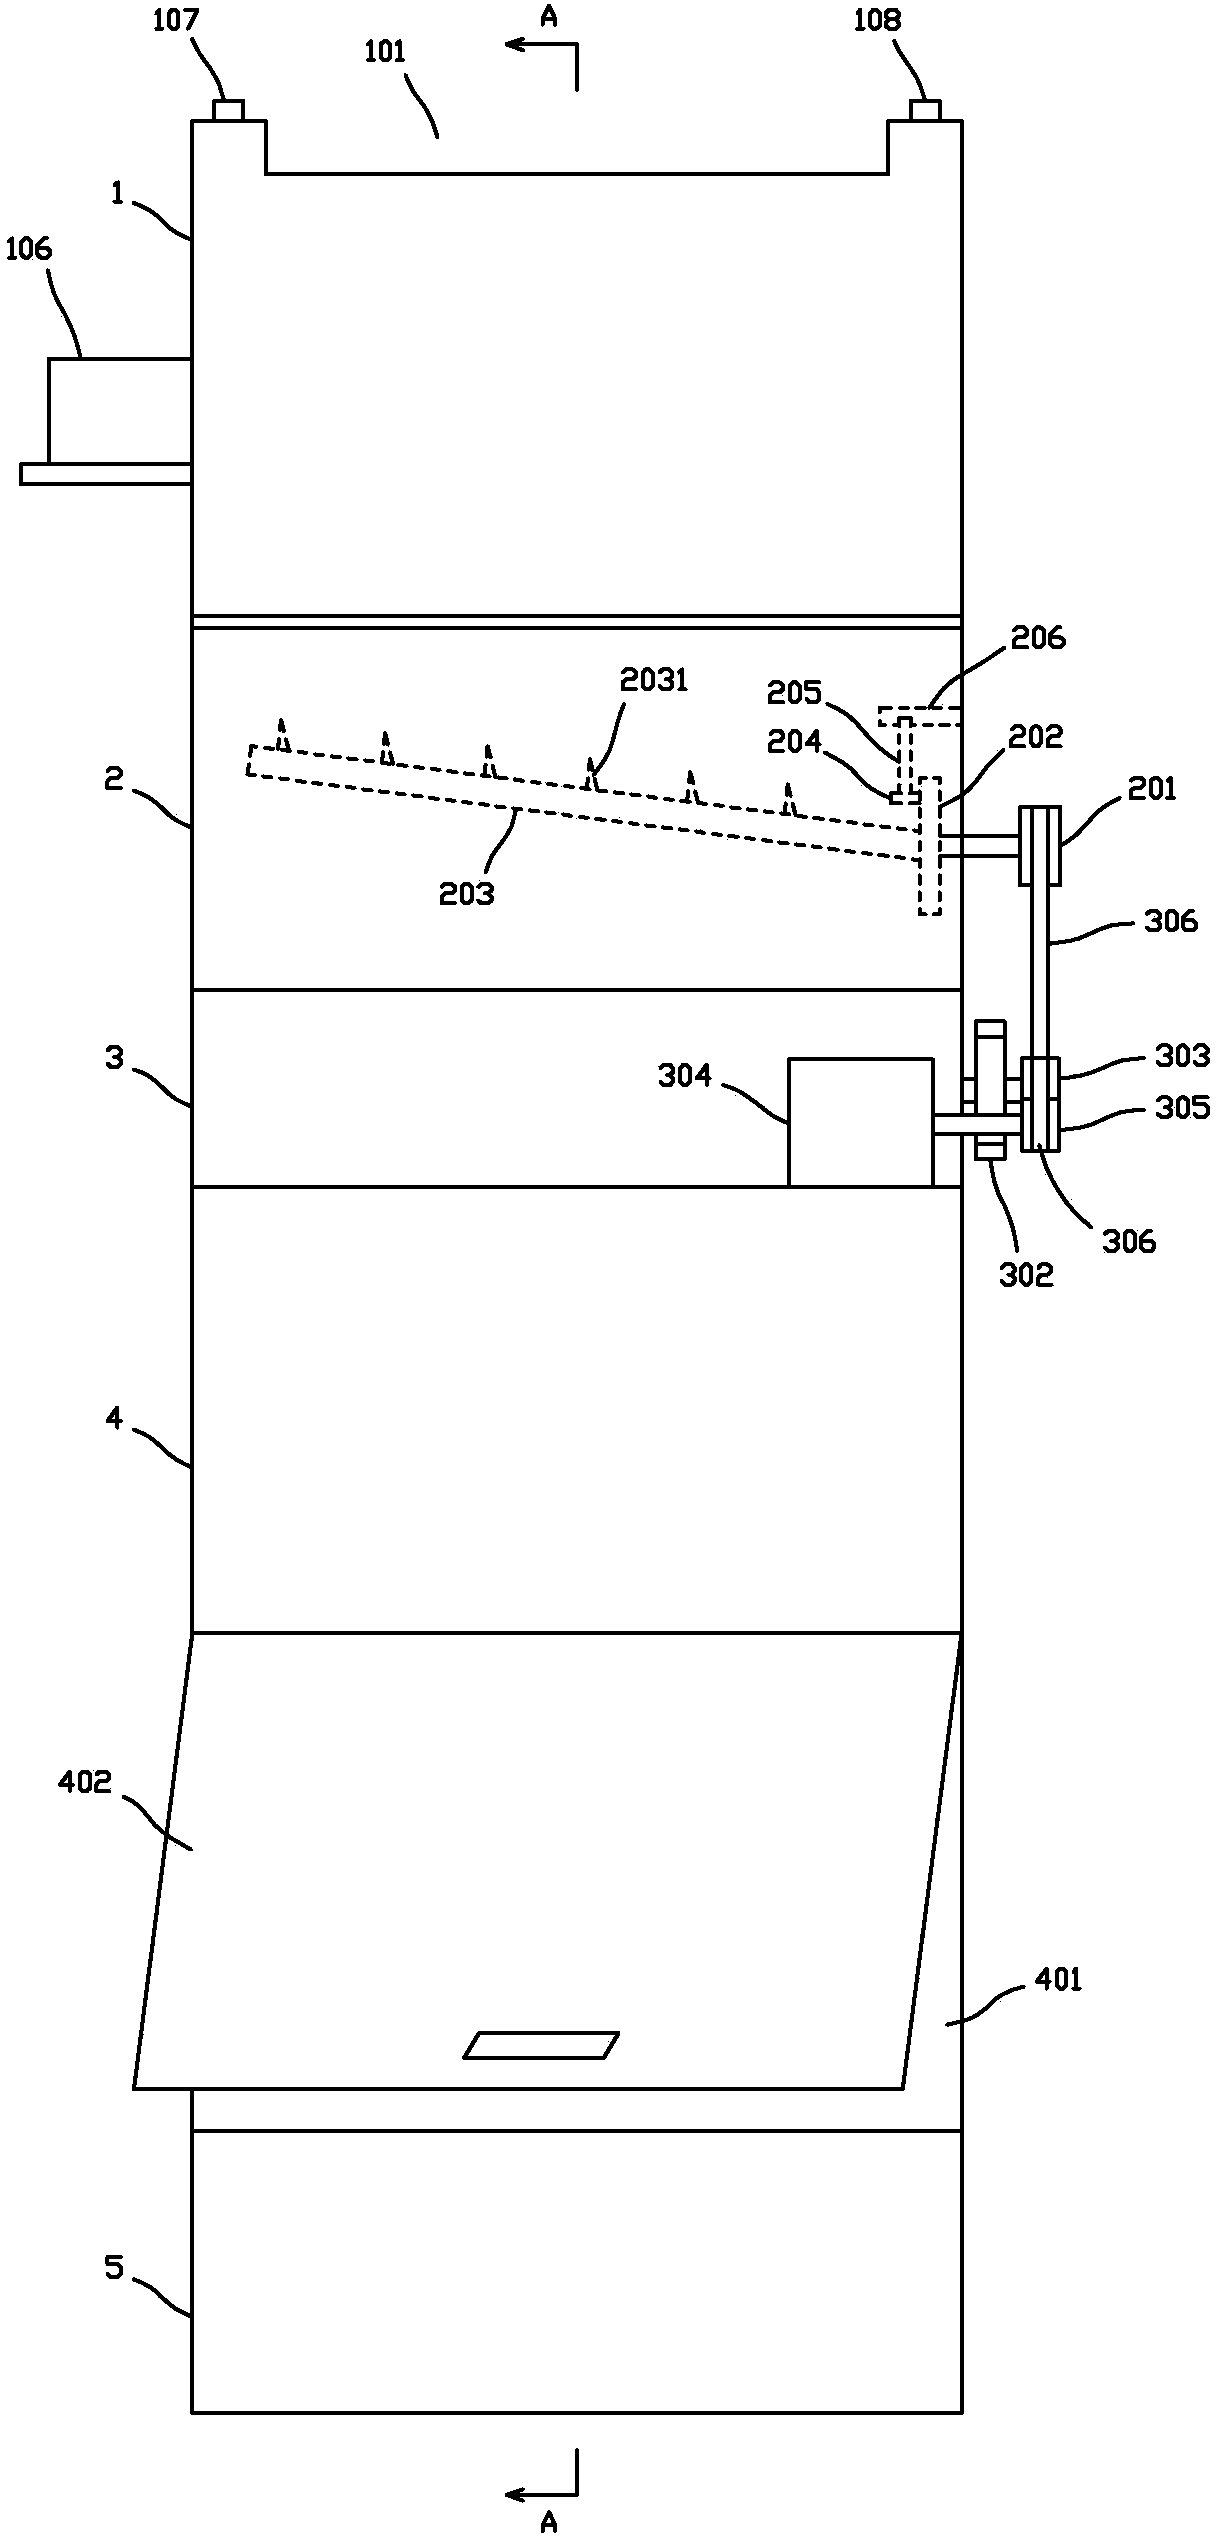 Medical waste treatment device